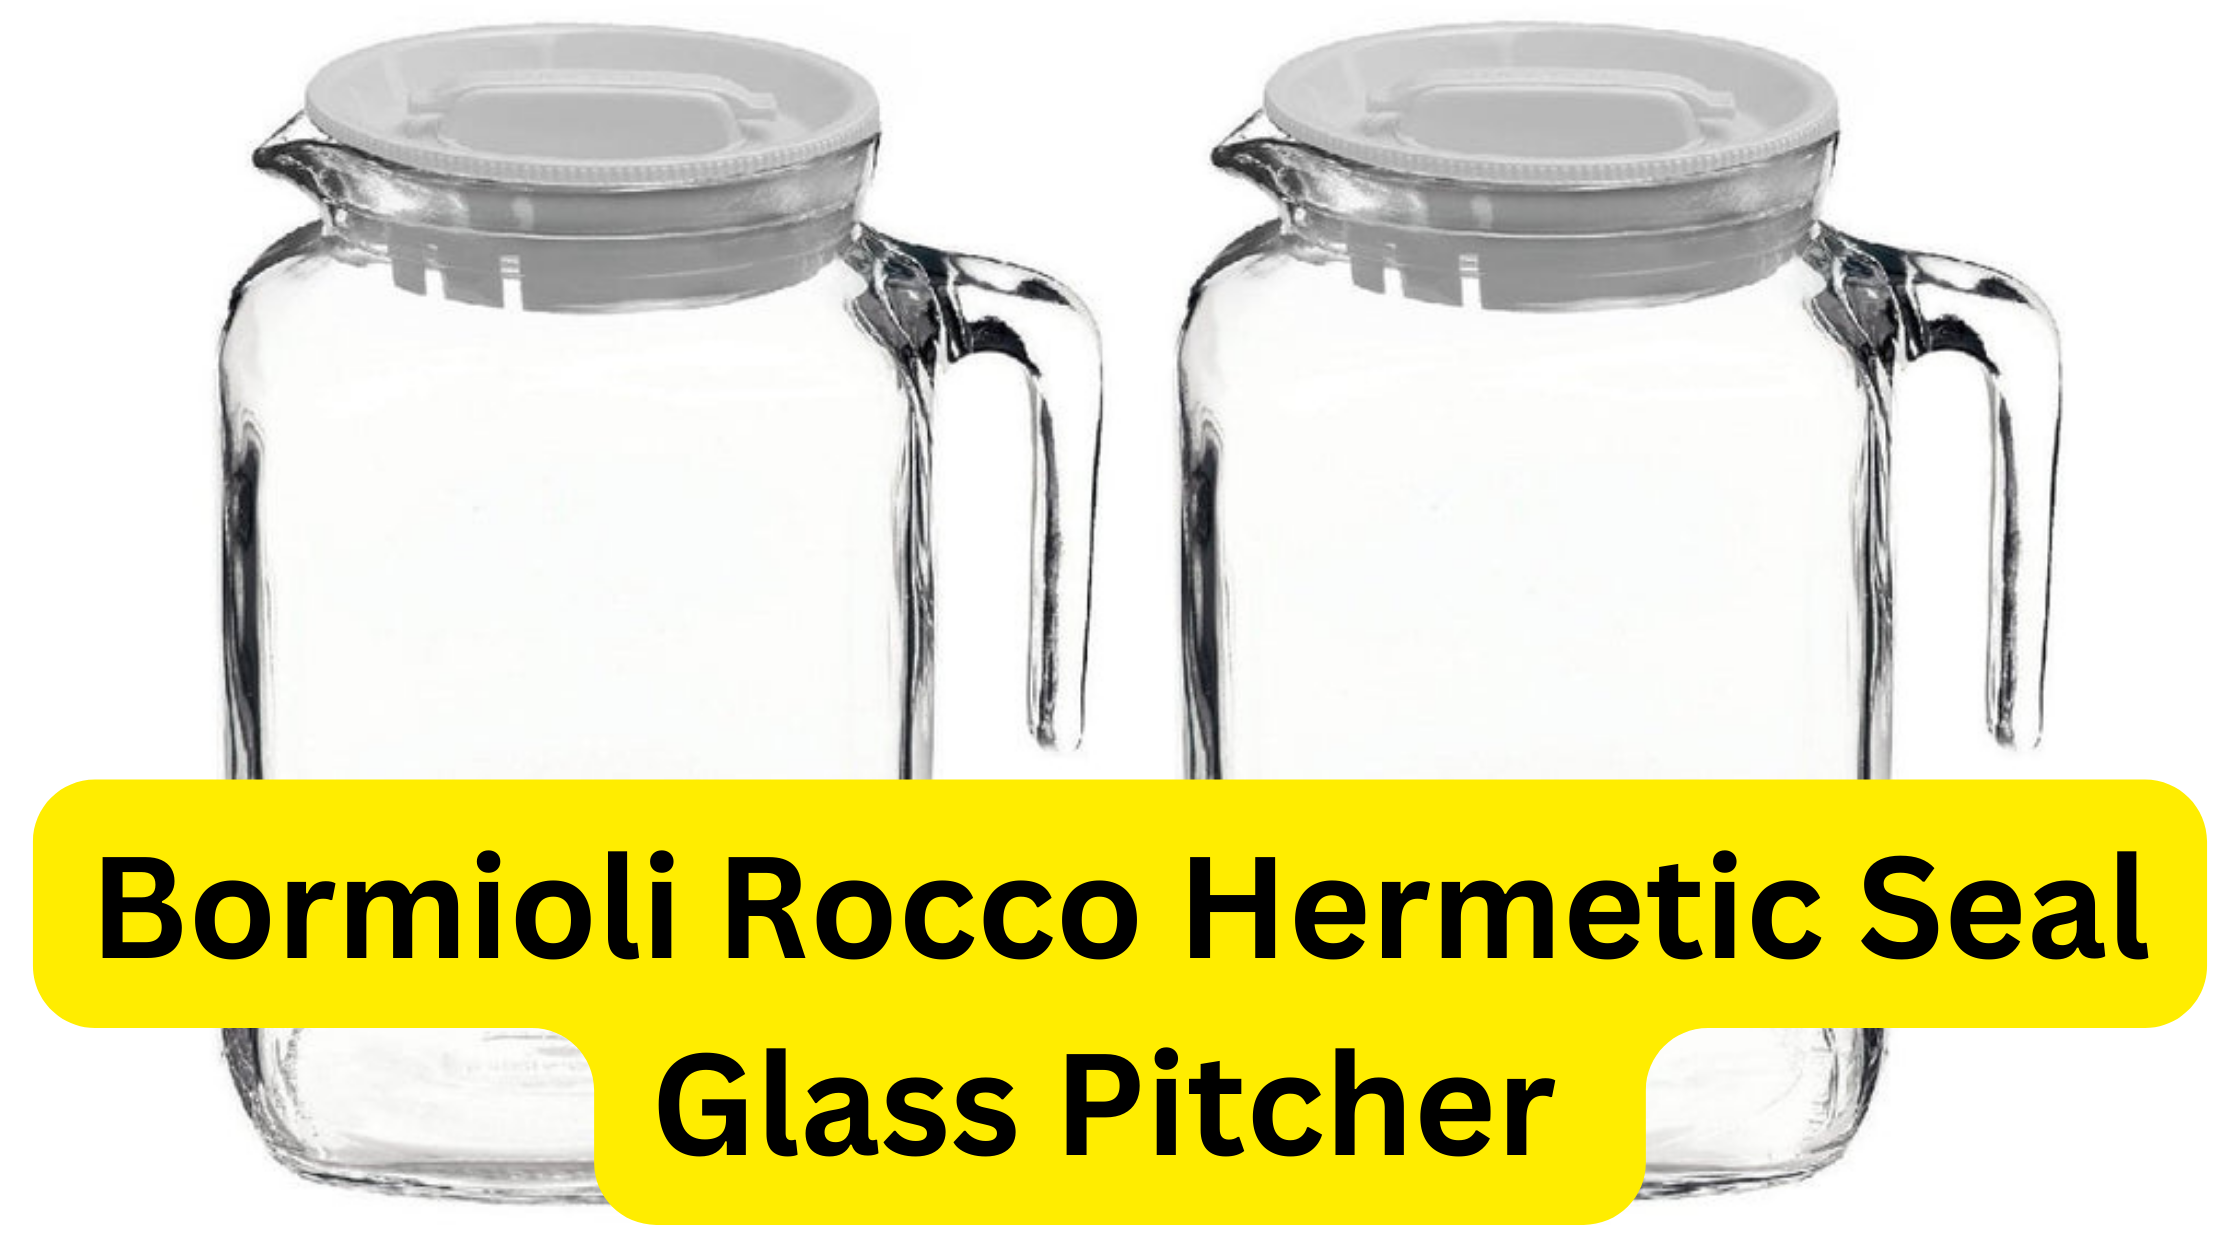 Bormioli Rocco Hermetic Seal Glass Pitcher With Lid and Spout [68 Ounce]  Great for Homemade Juice & Cold Tea or for Glass Milk B